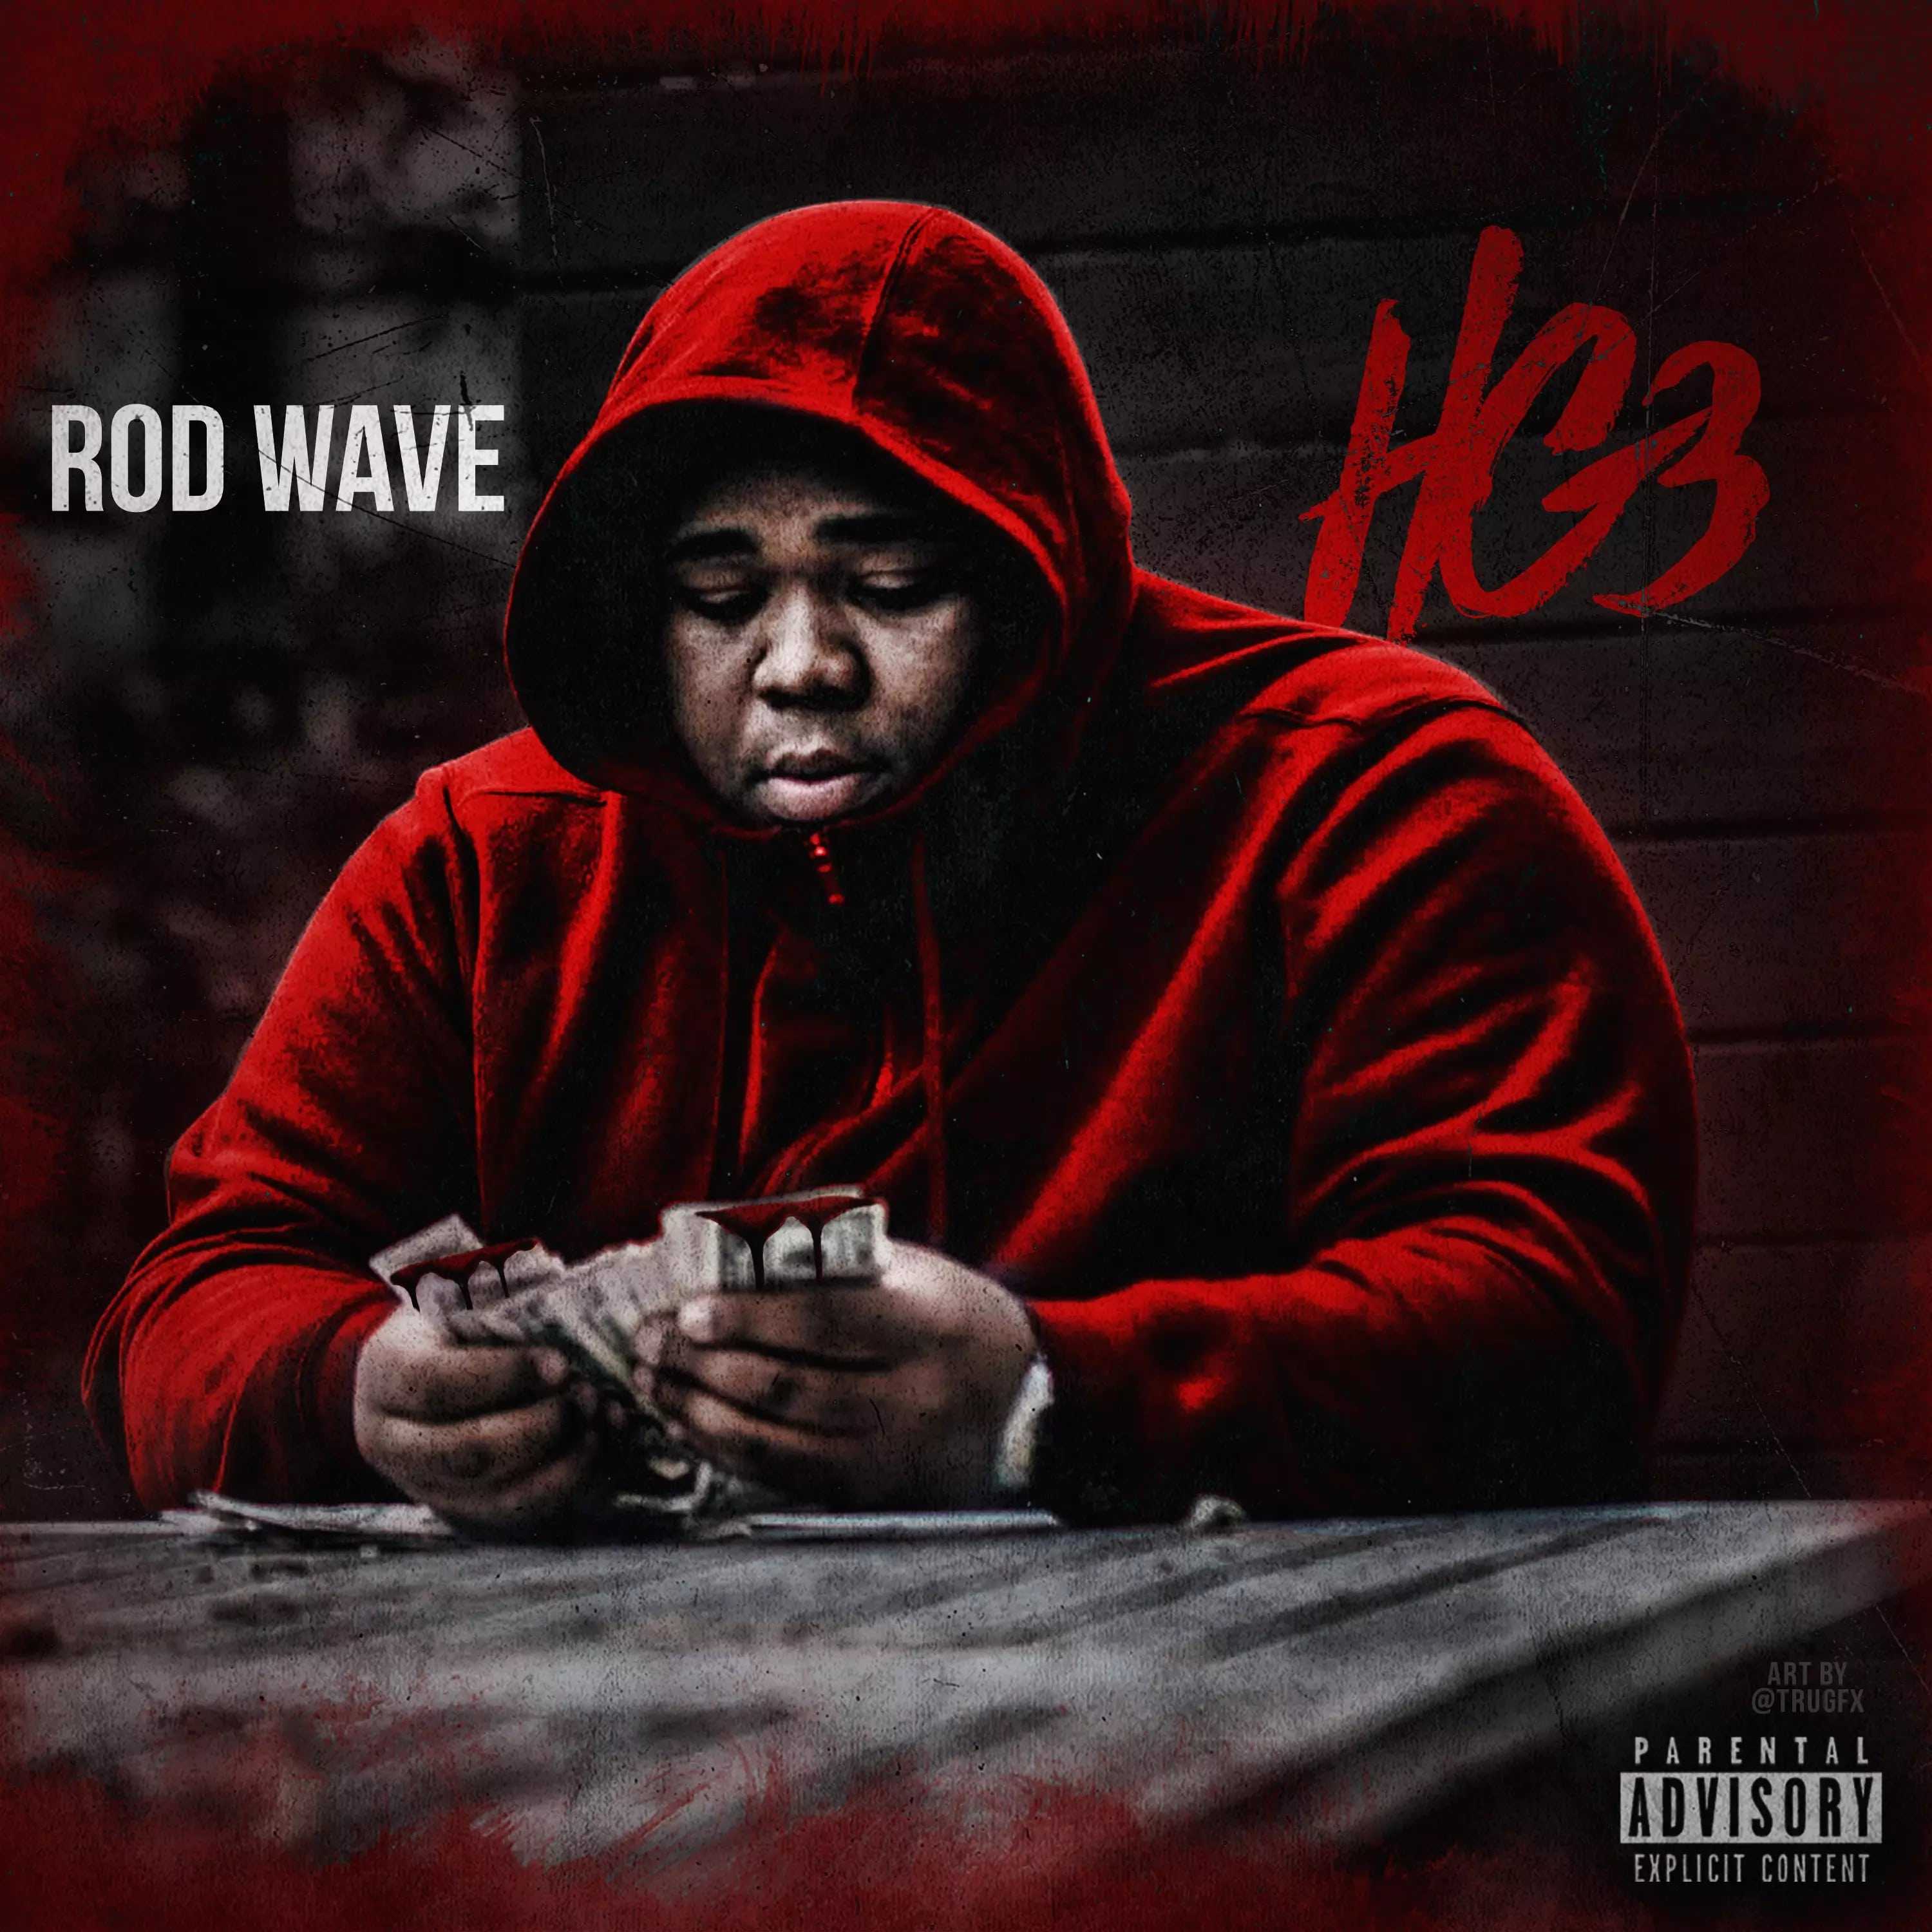 Rod Wave Backgrounds KoLPaPer Awesome Free HD Wallpapers.